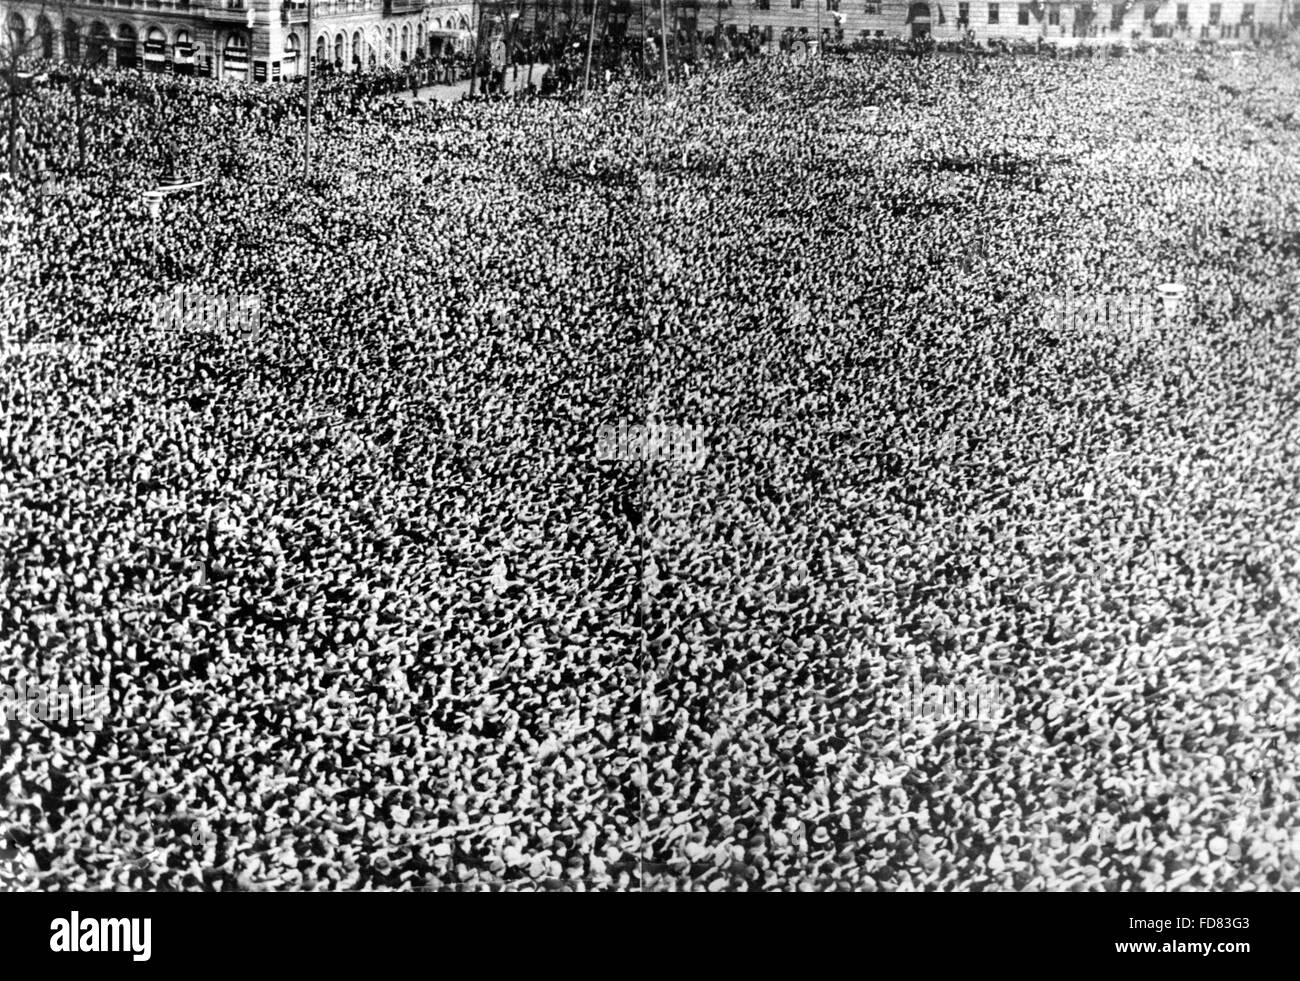 Crowd in Berlin after the annexation of Austria in 1938 Stock Photo